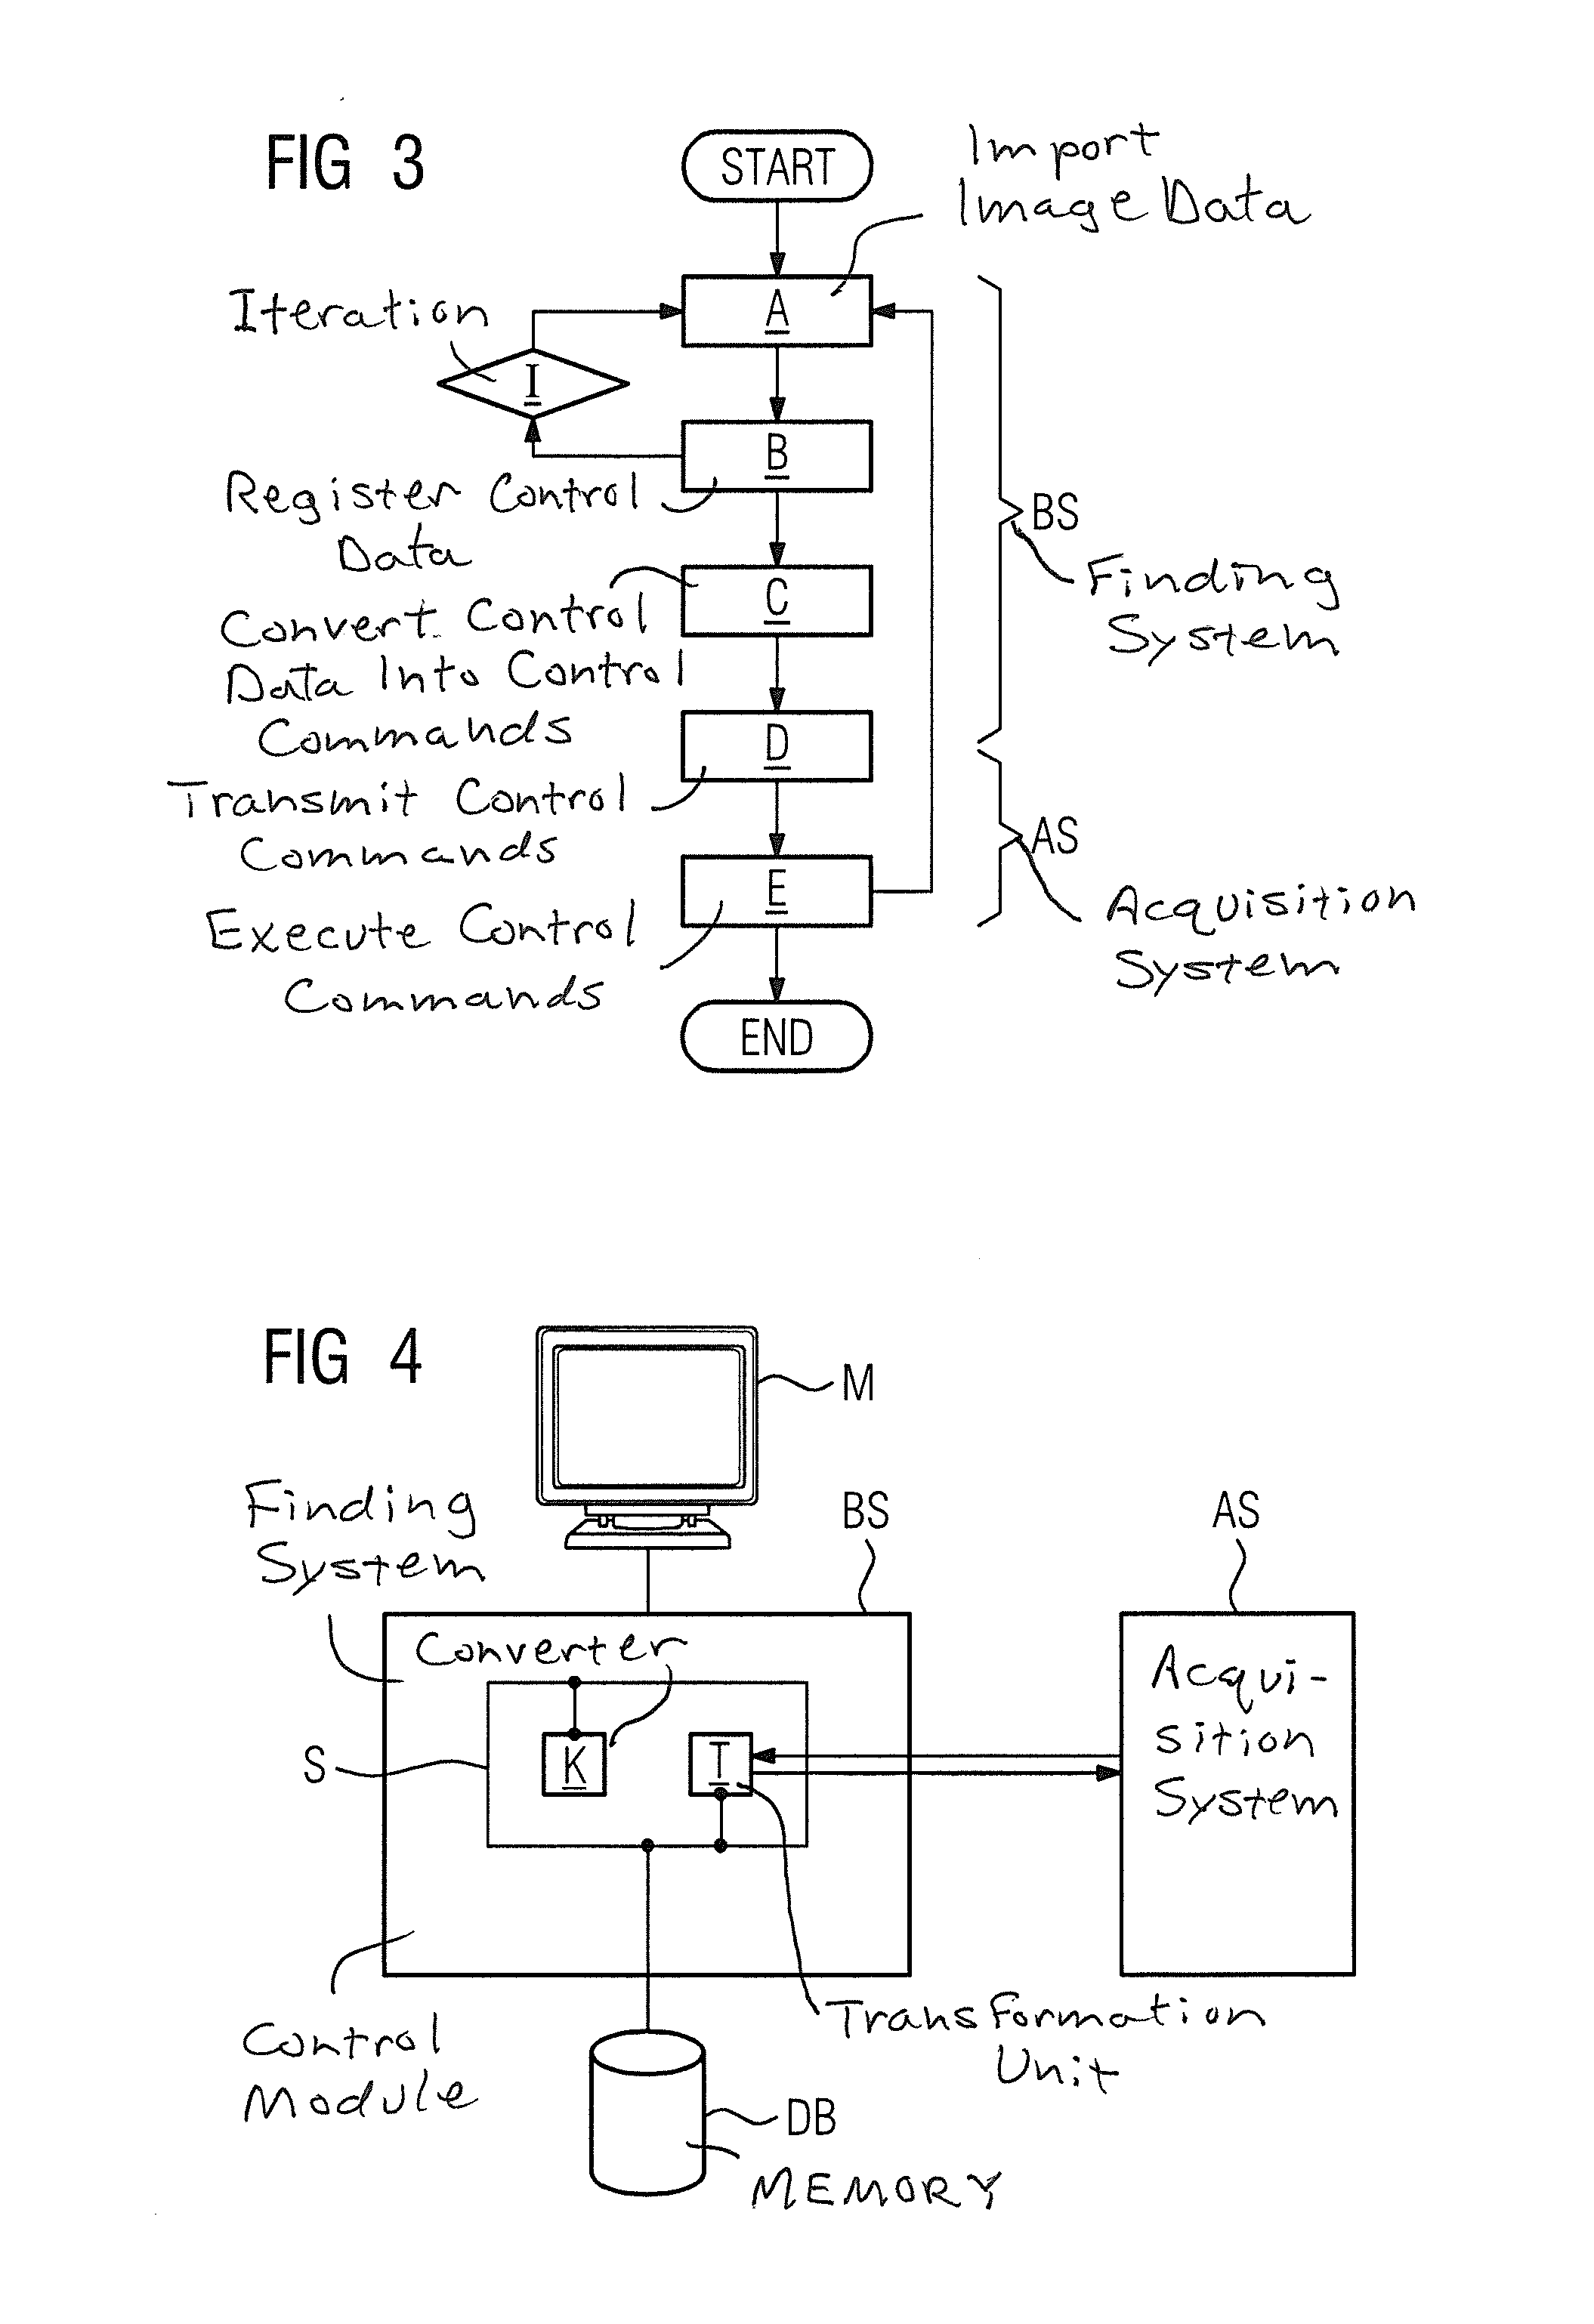 Medical finding system with control module for image acquisition